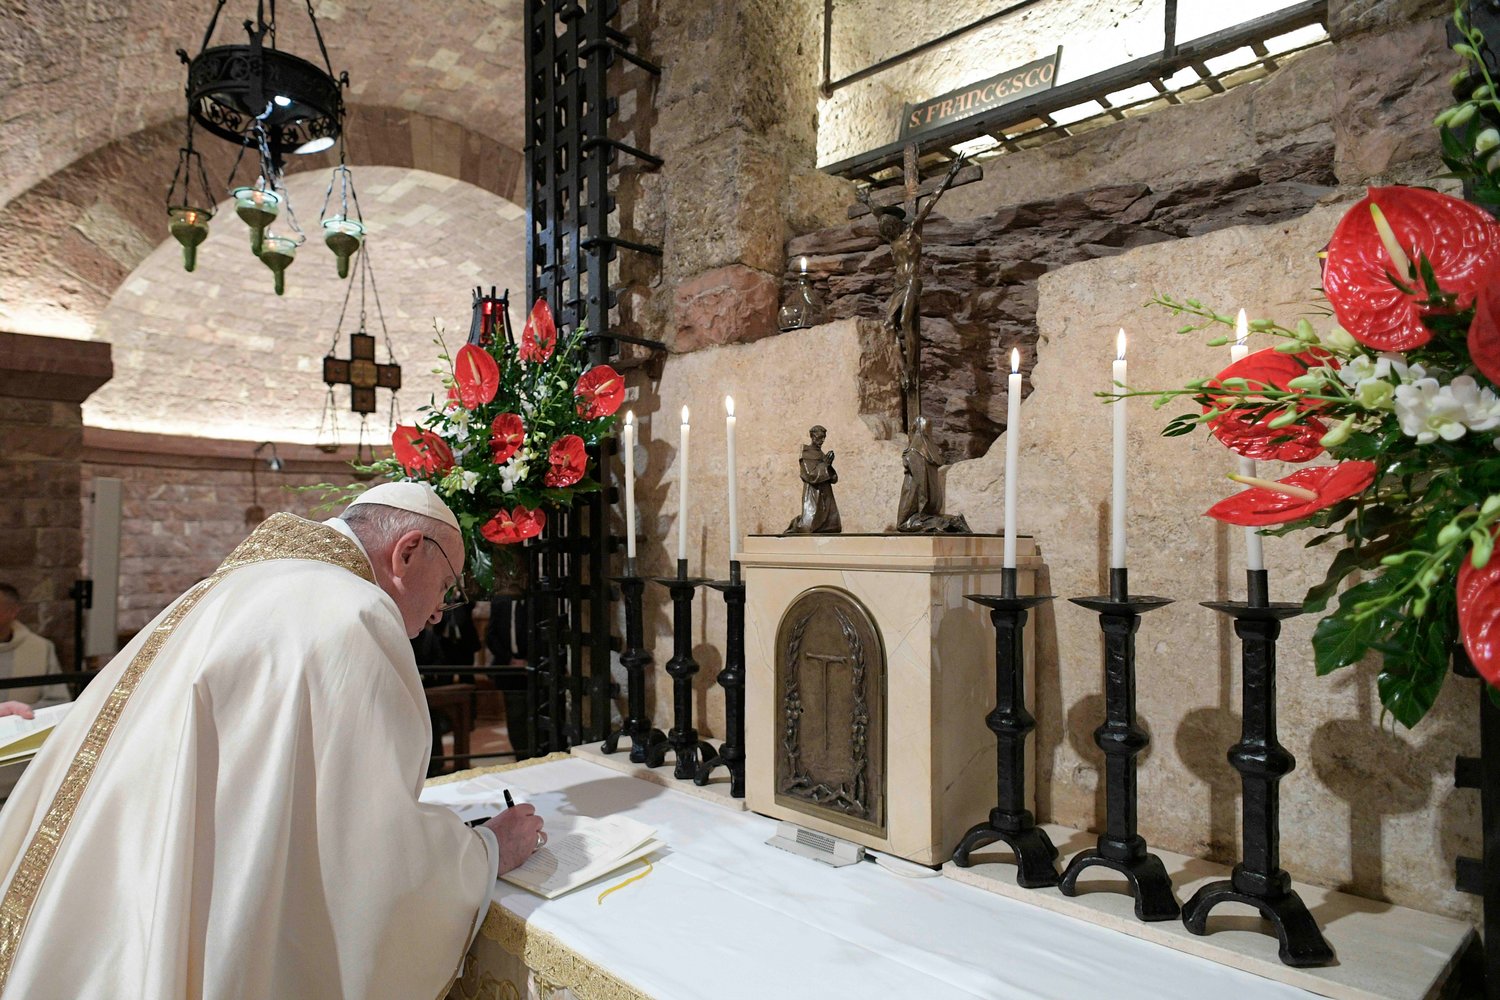 Pope Francis signs his new encyclical, "Fratelli Tutti, on Fraternity and Social Friendship" after celebrating Mass at the Basilica of St. Francis in Assisi, Italy, Oct. 3, 2020.